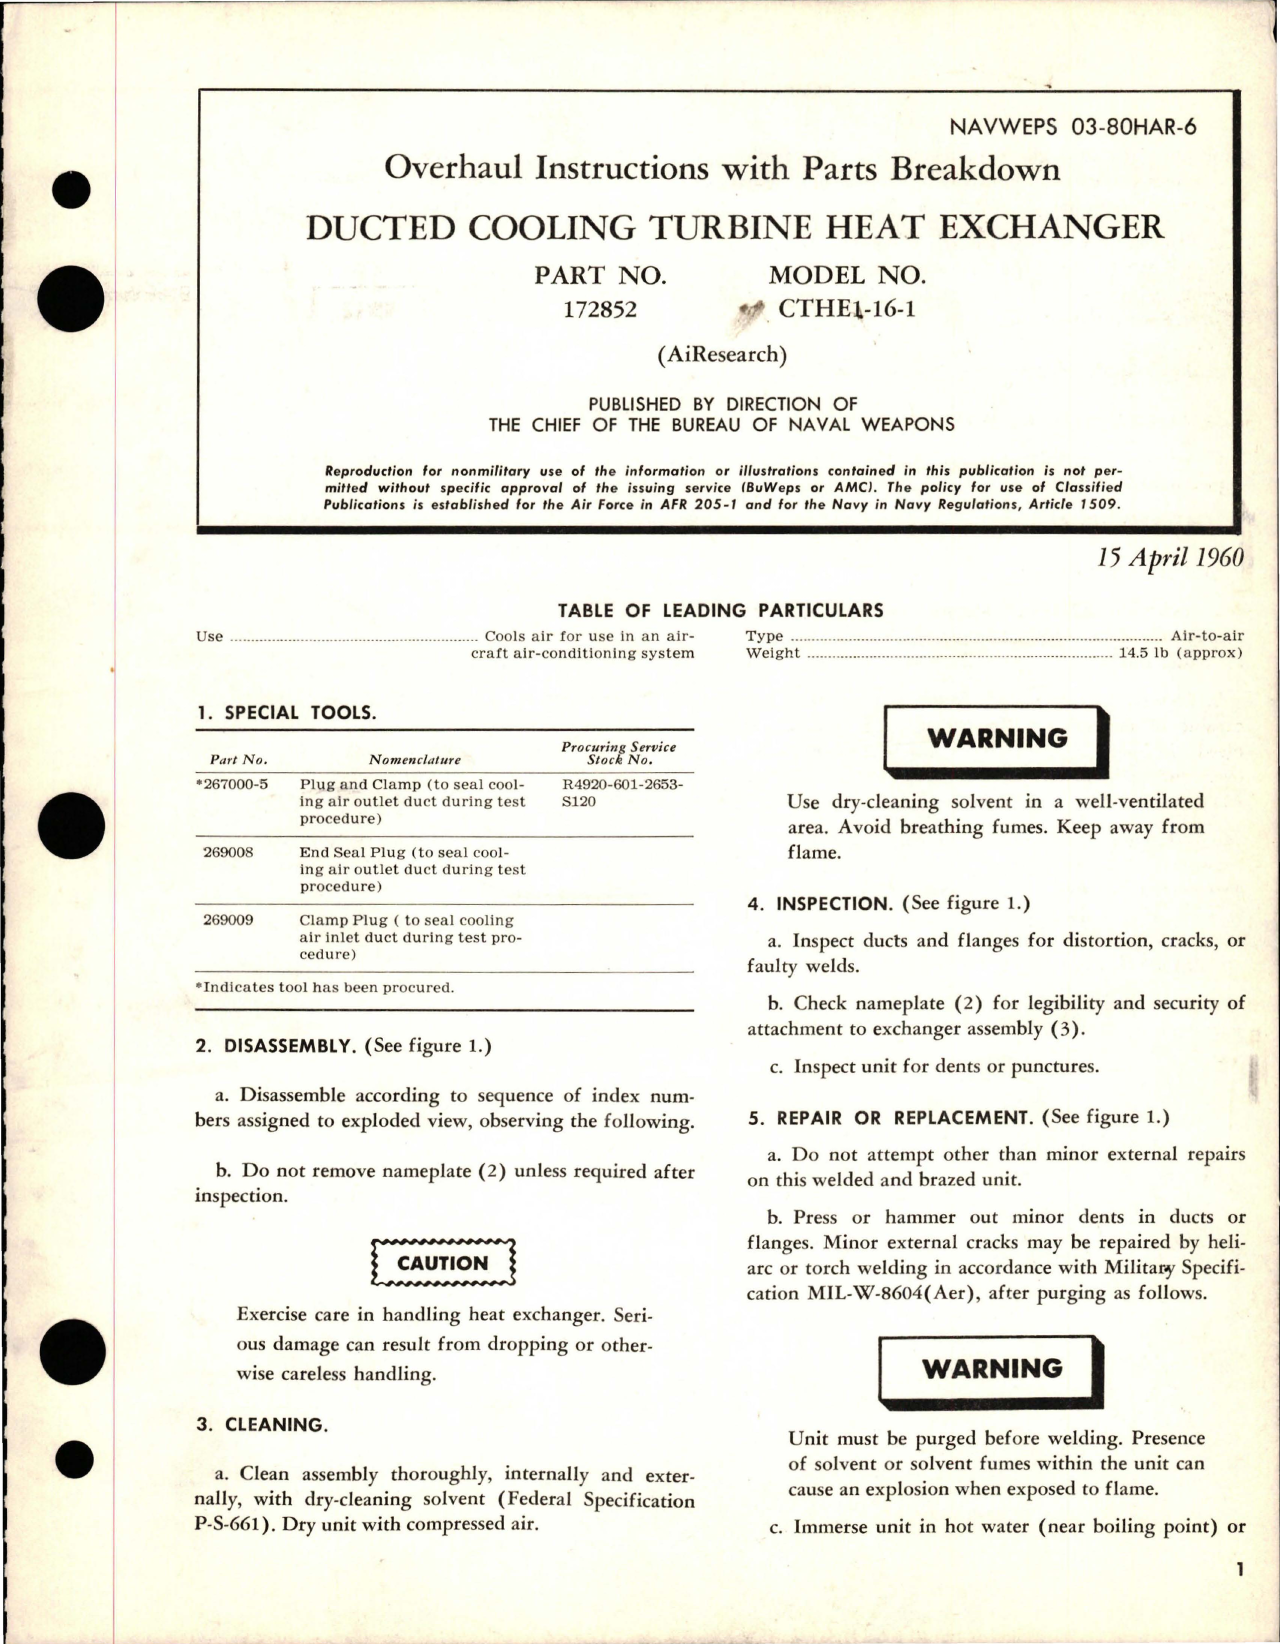 Sample page 1 from AirCorps Library document: Overhaul Instructions with Parts Breakdown for Ducted Cooling Turbine Heat Exchanger - Part 172852 - Model CTHE1-16-1